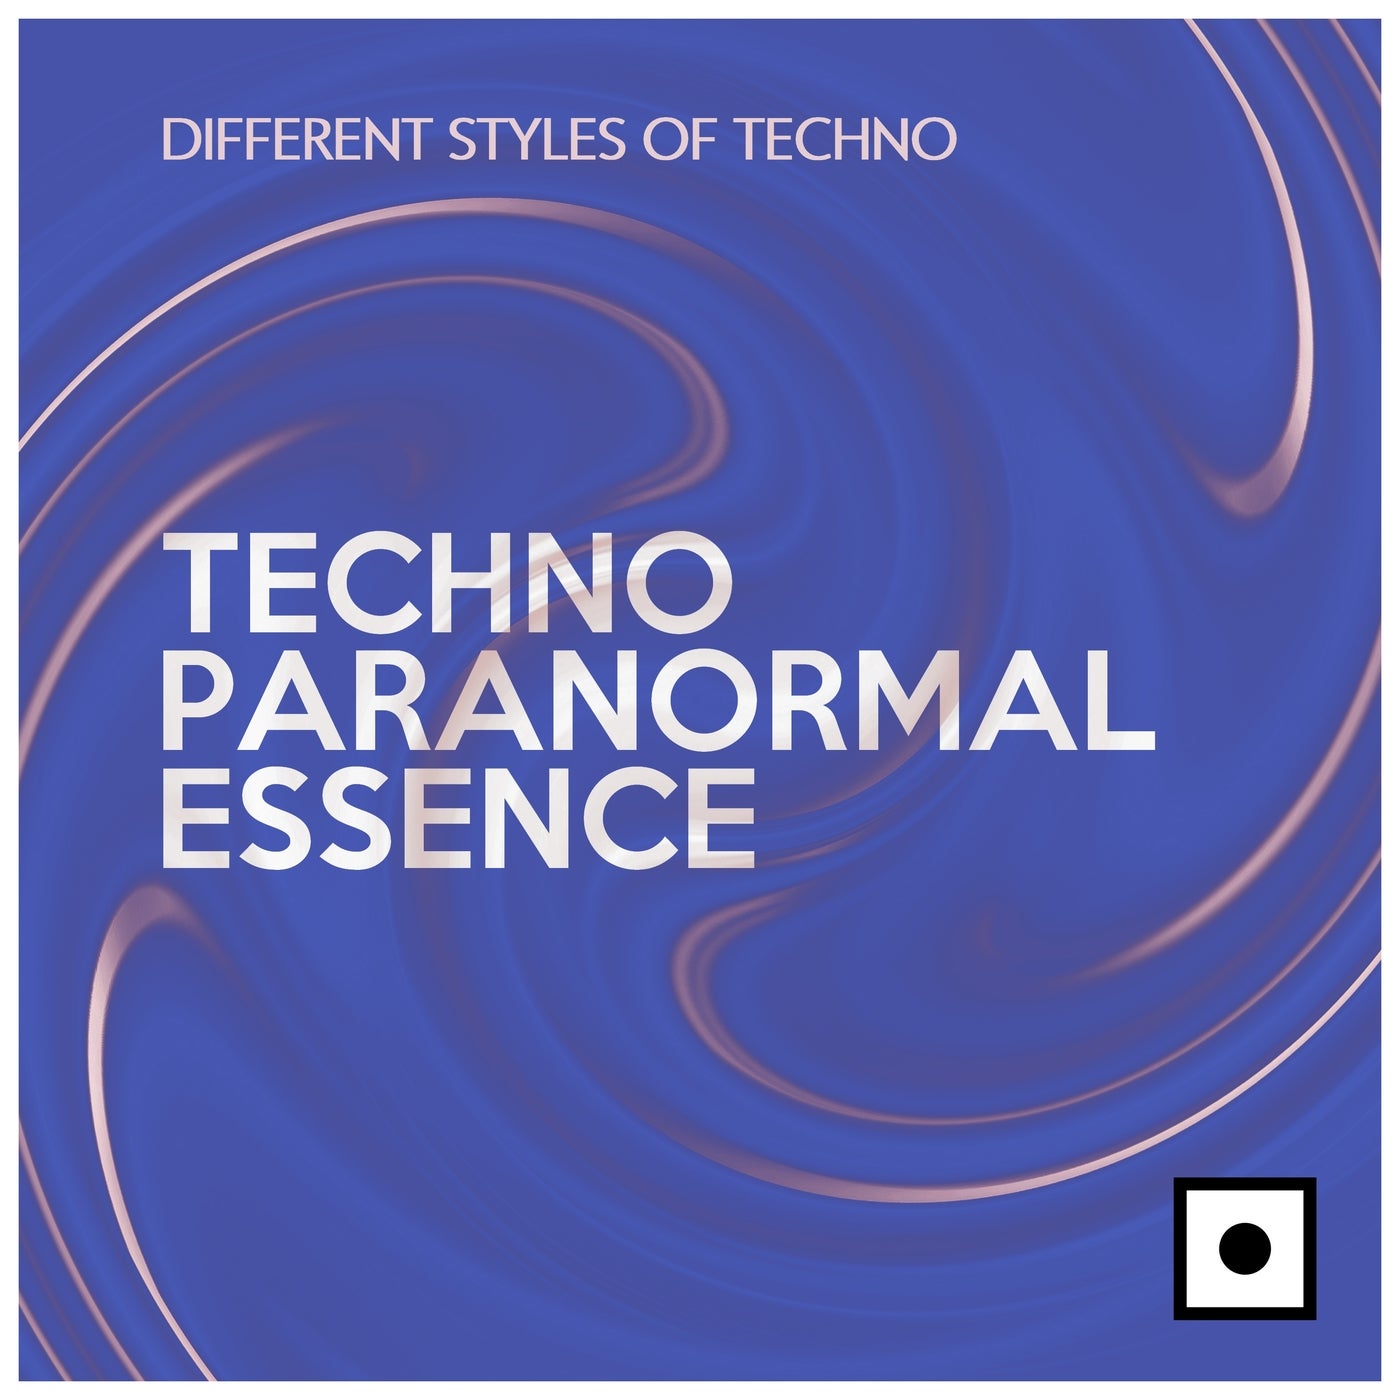 Techno Paranormal Essence (Different Styles Of Techno)